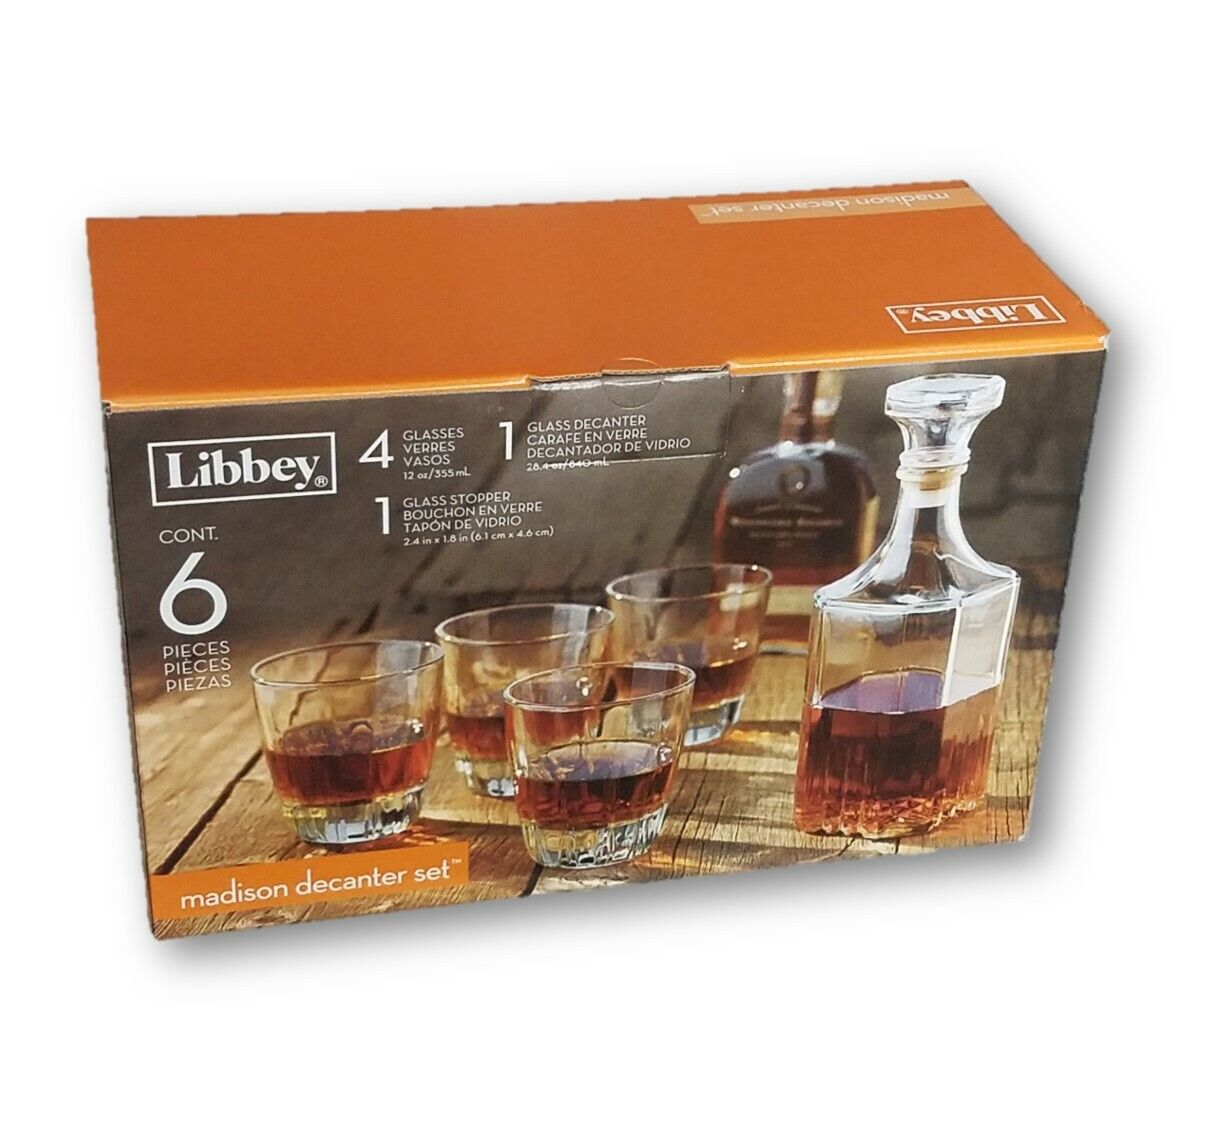 6-PC LIBBEY MADISION WHISKEY SET WITH GLASS DECANTER & 12 OZ WHISKY GLASSES NEW